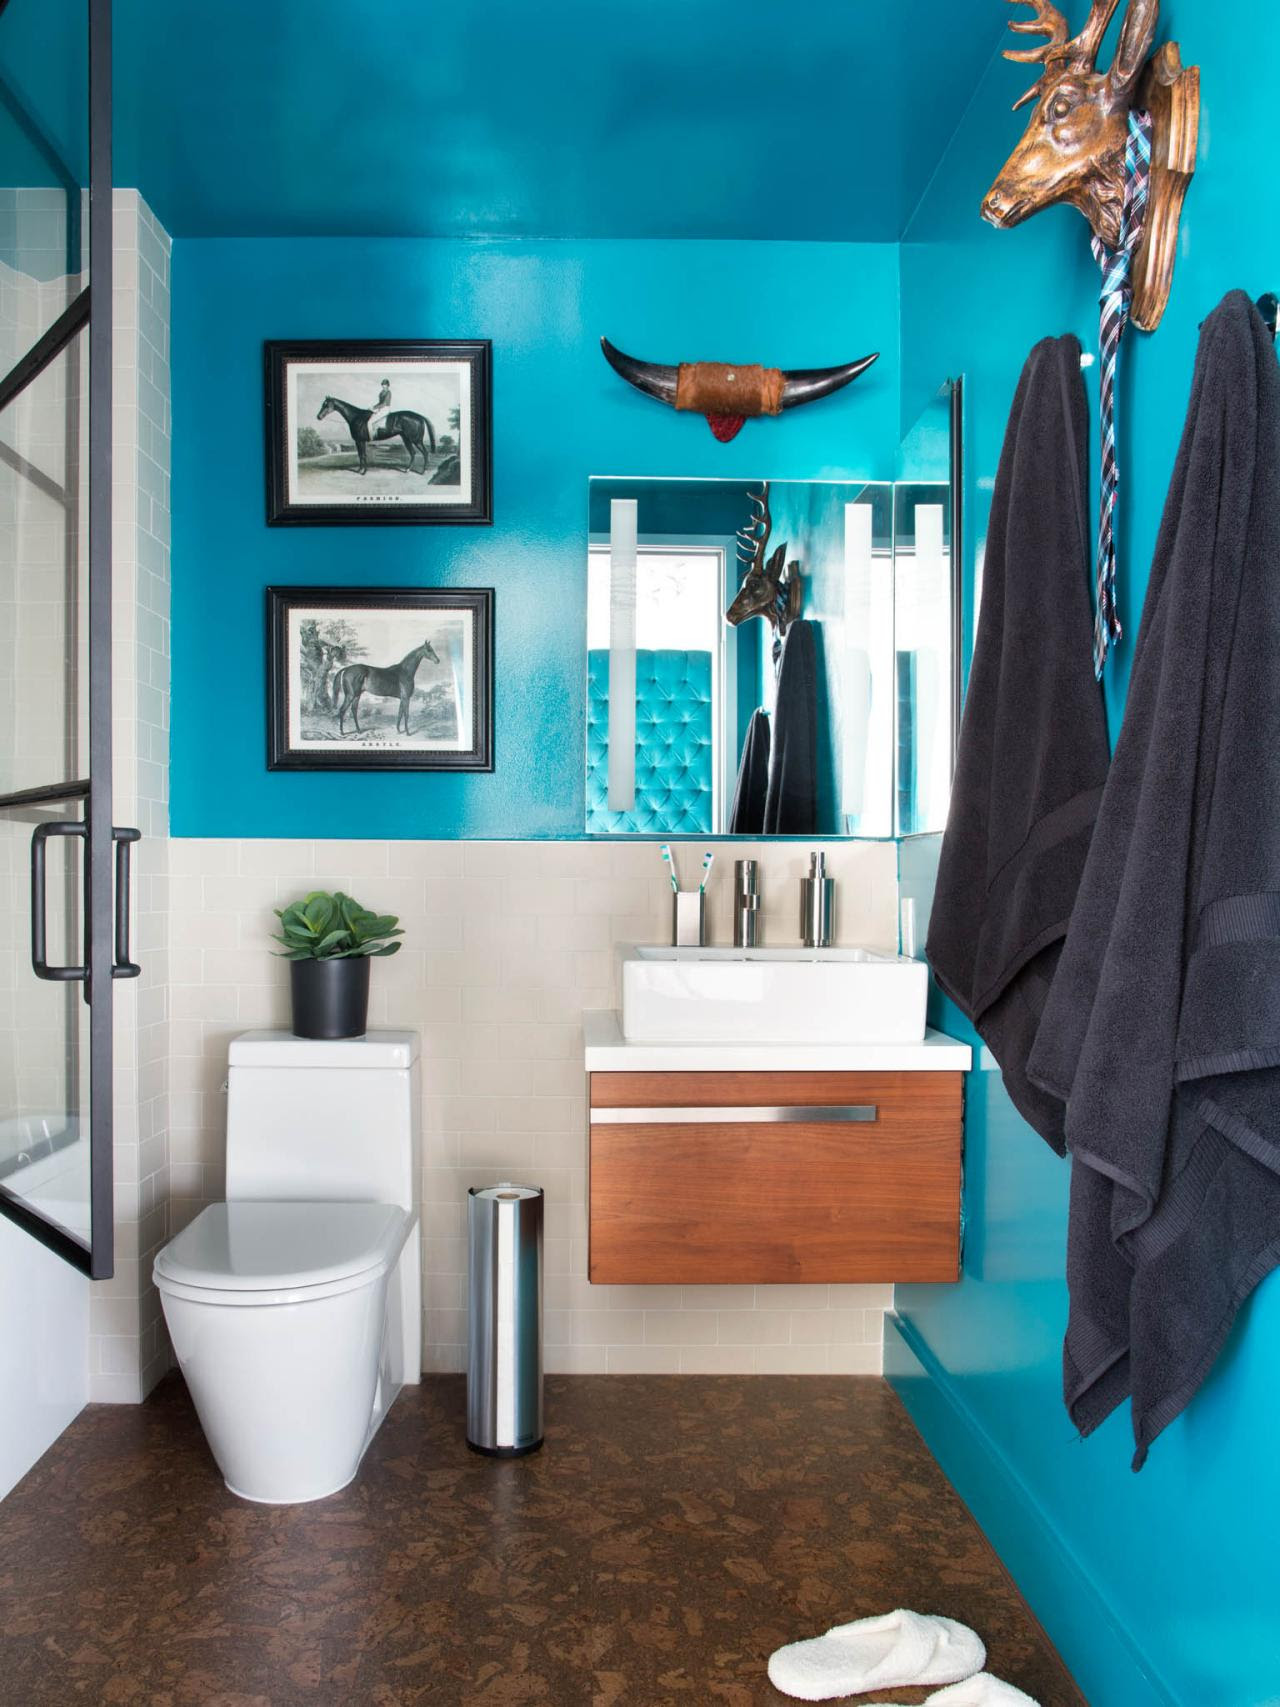 10 Paint Color Ideas for Small Bathrooms | DIY Network ...